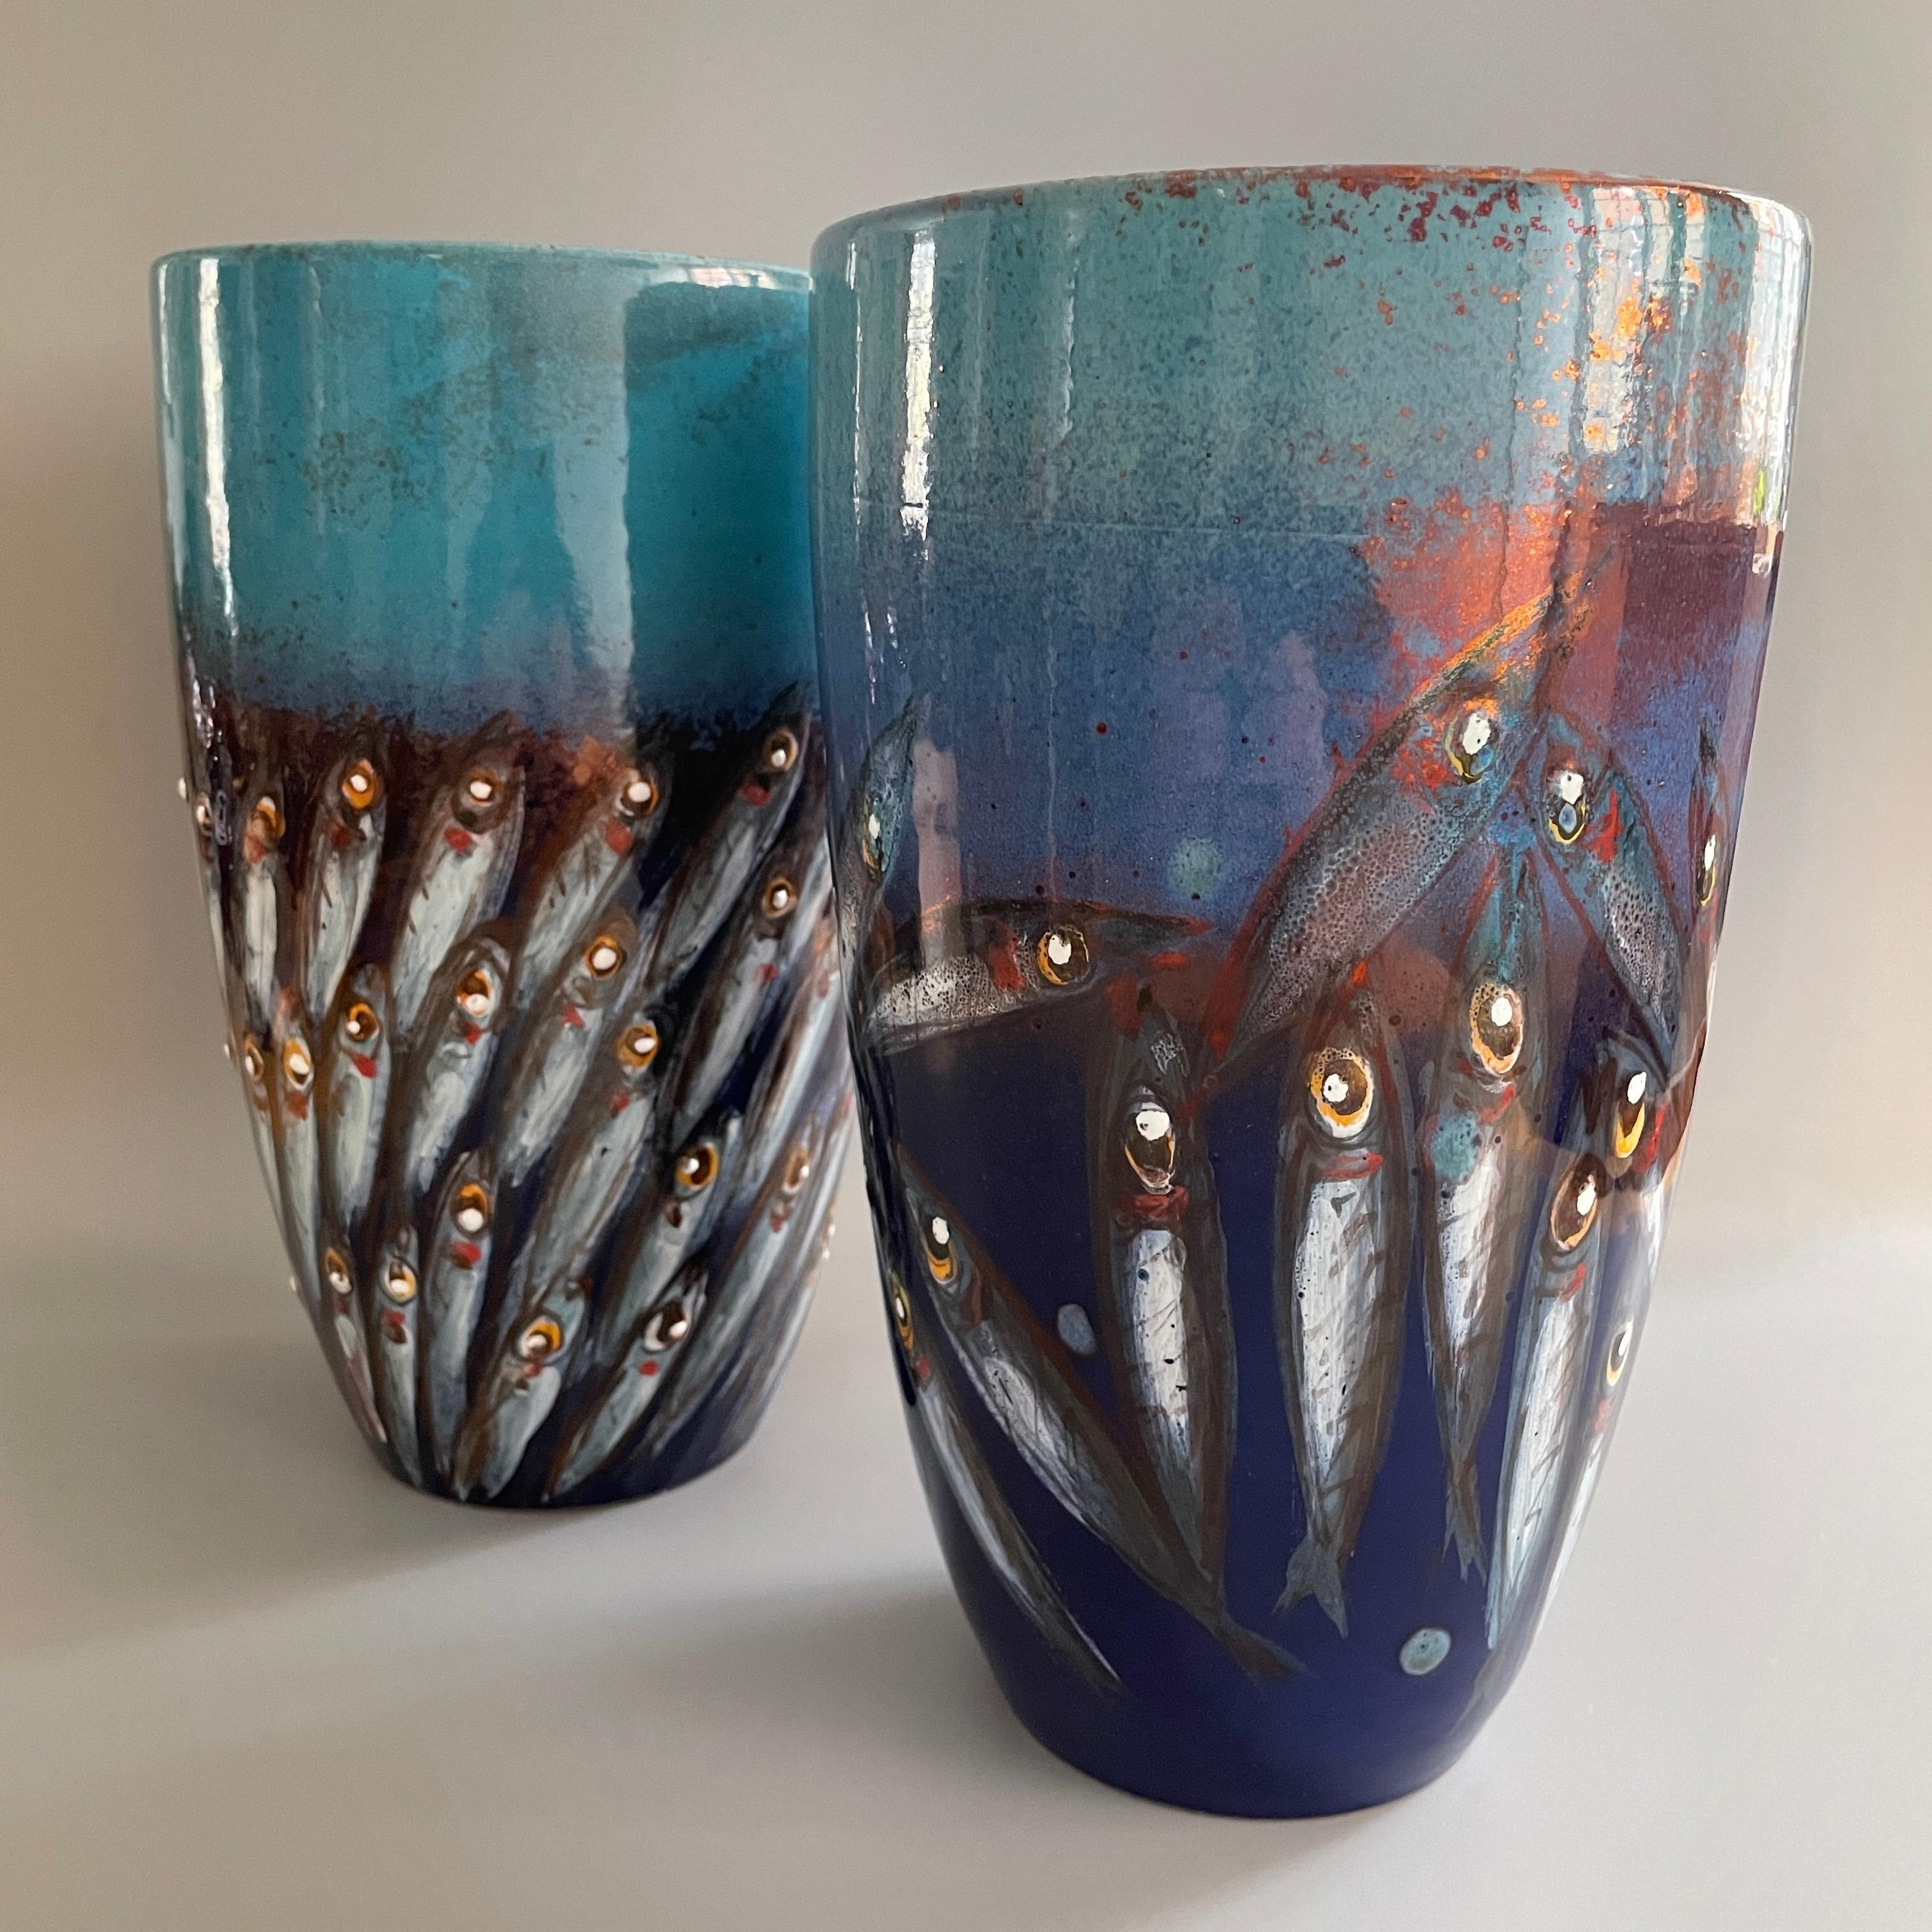 Pair of Mediterranea vases, 2020, full-fire reduction faience earthenware hand-painted with copper lustre 12cm diameter 25 cm height, hand painted unique pieces.

Bottega Vignoli is a brand of artistic ceramics based in Faenza, one of the most